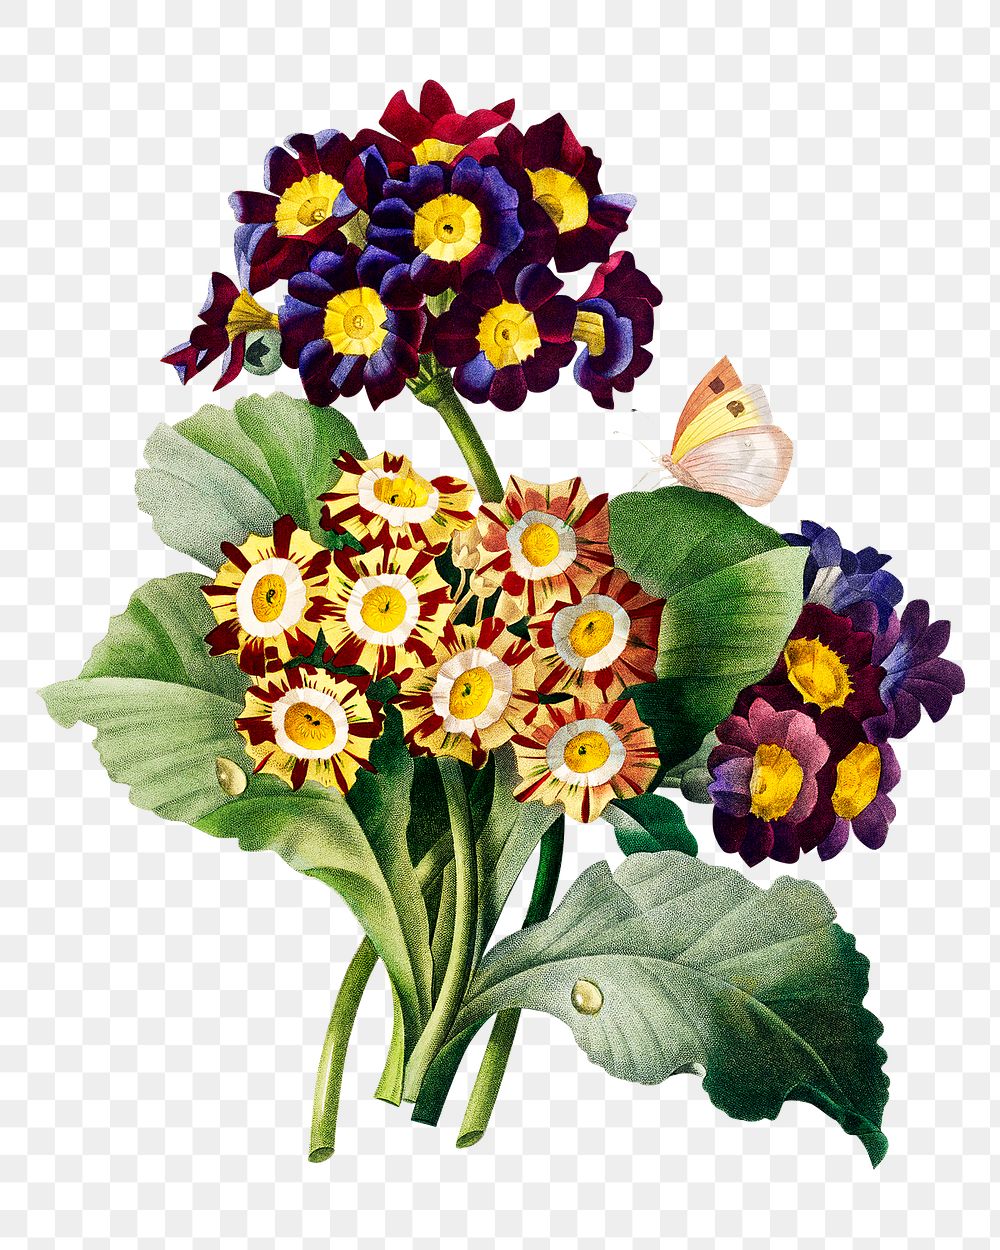 Primula auricula flower png botanical illustration, remixed from artworks by Pierre-Joseph Redout&eacute;